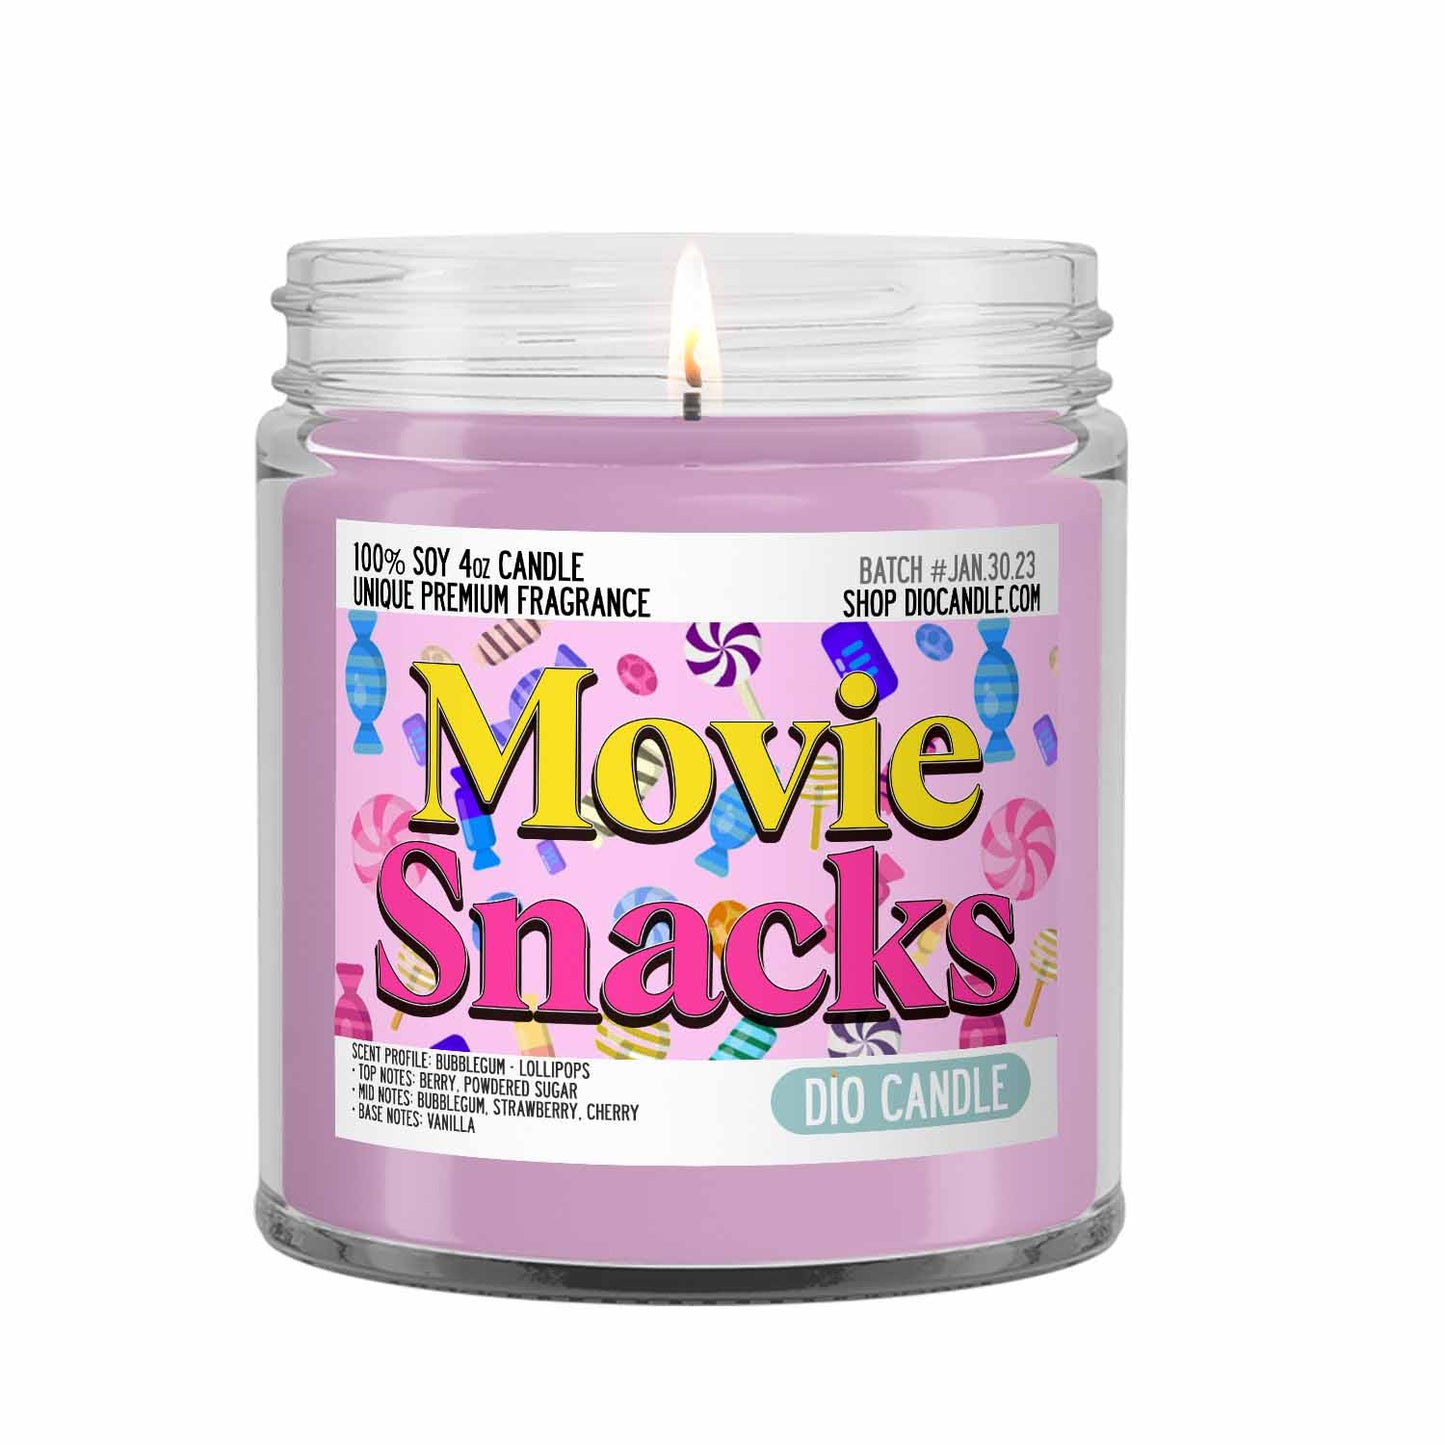 Movie Snacks Candle